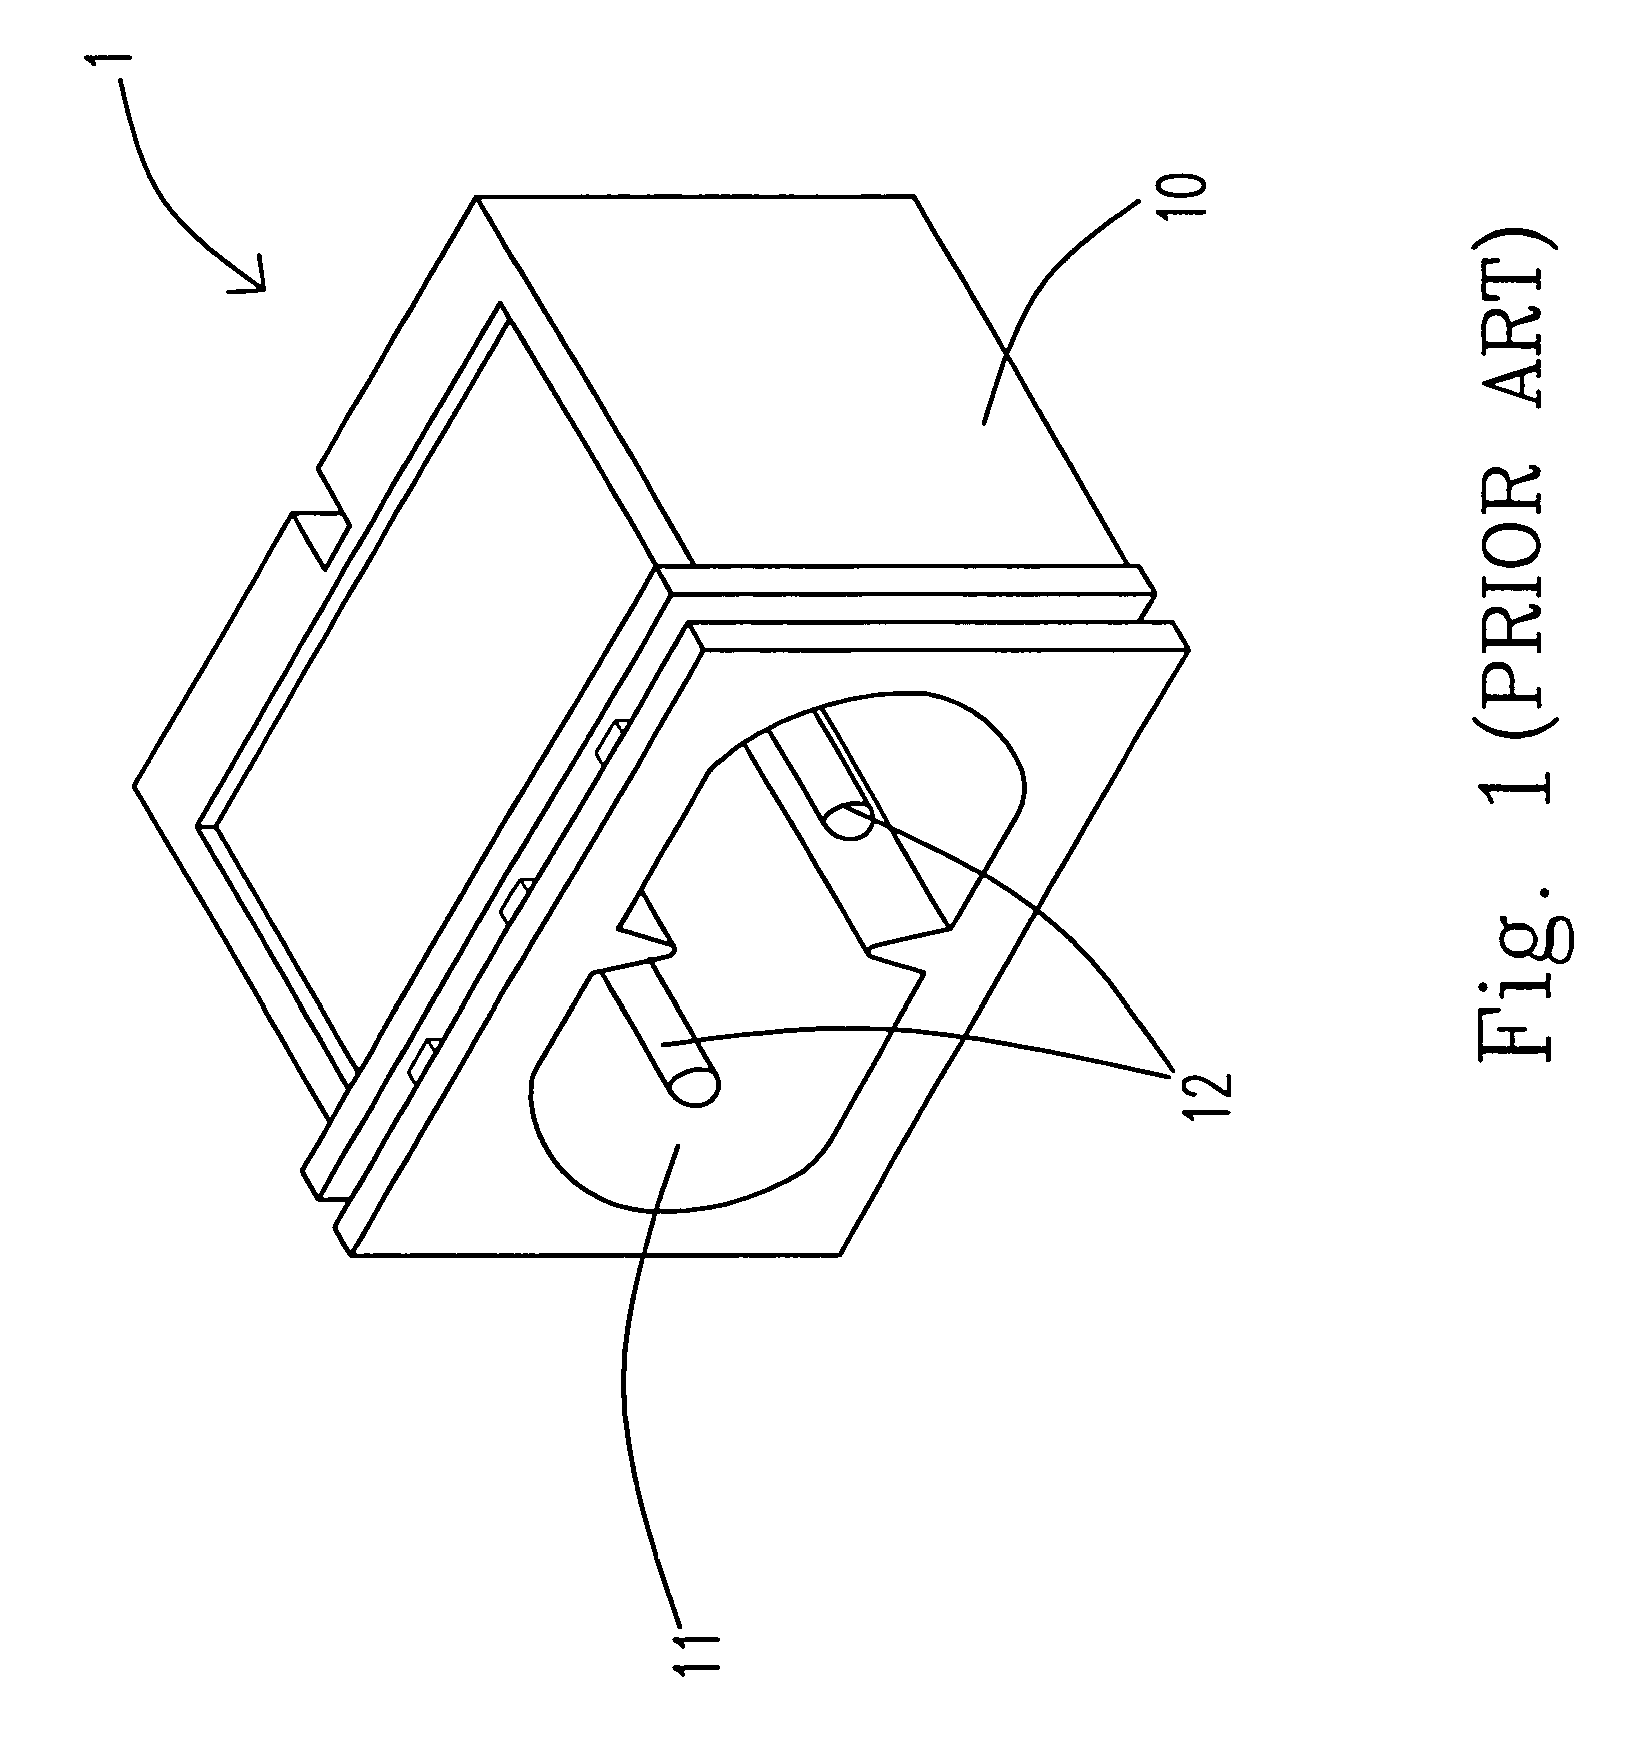 Socket structure and method for forming the same